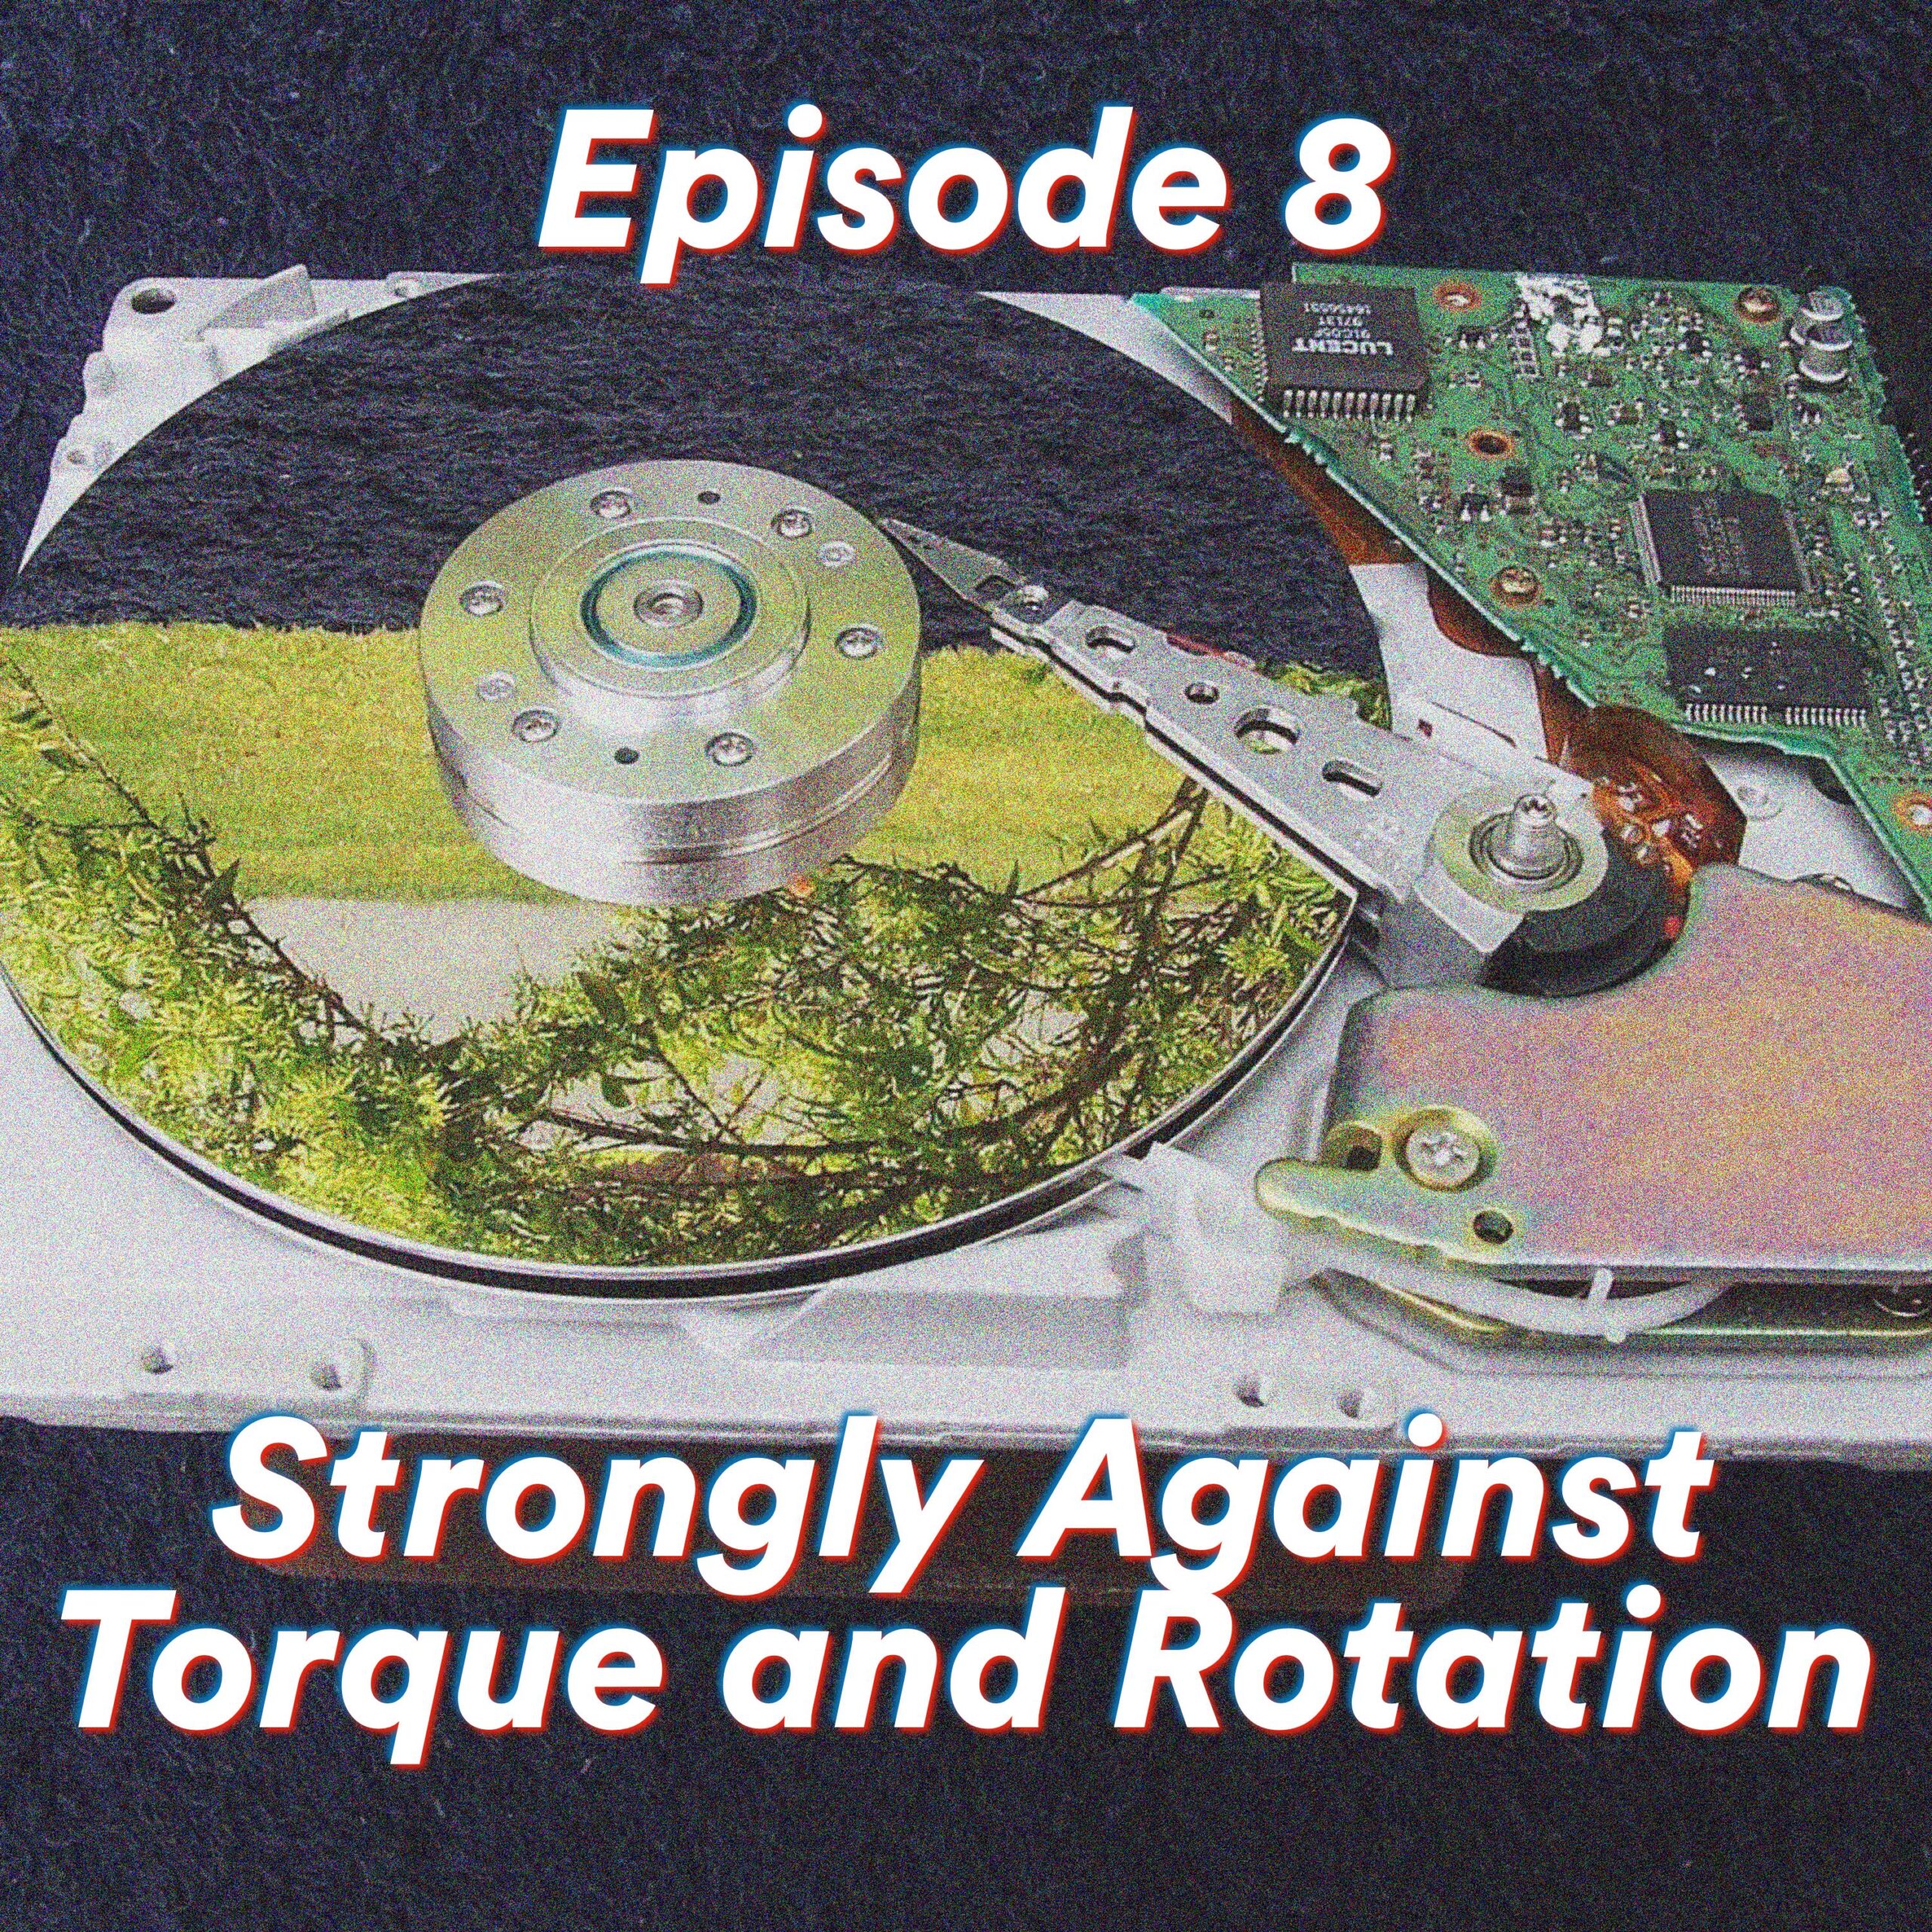 Episode 8: Strongly Against Torque and Rotation